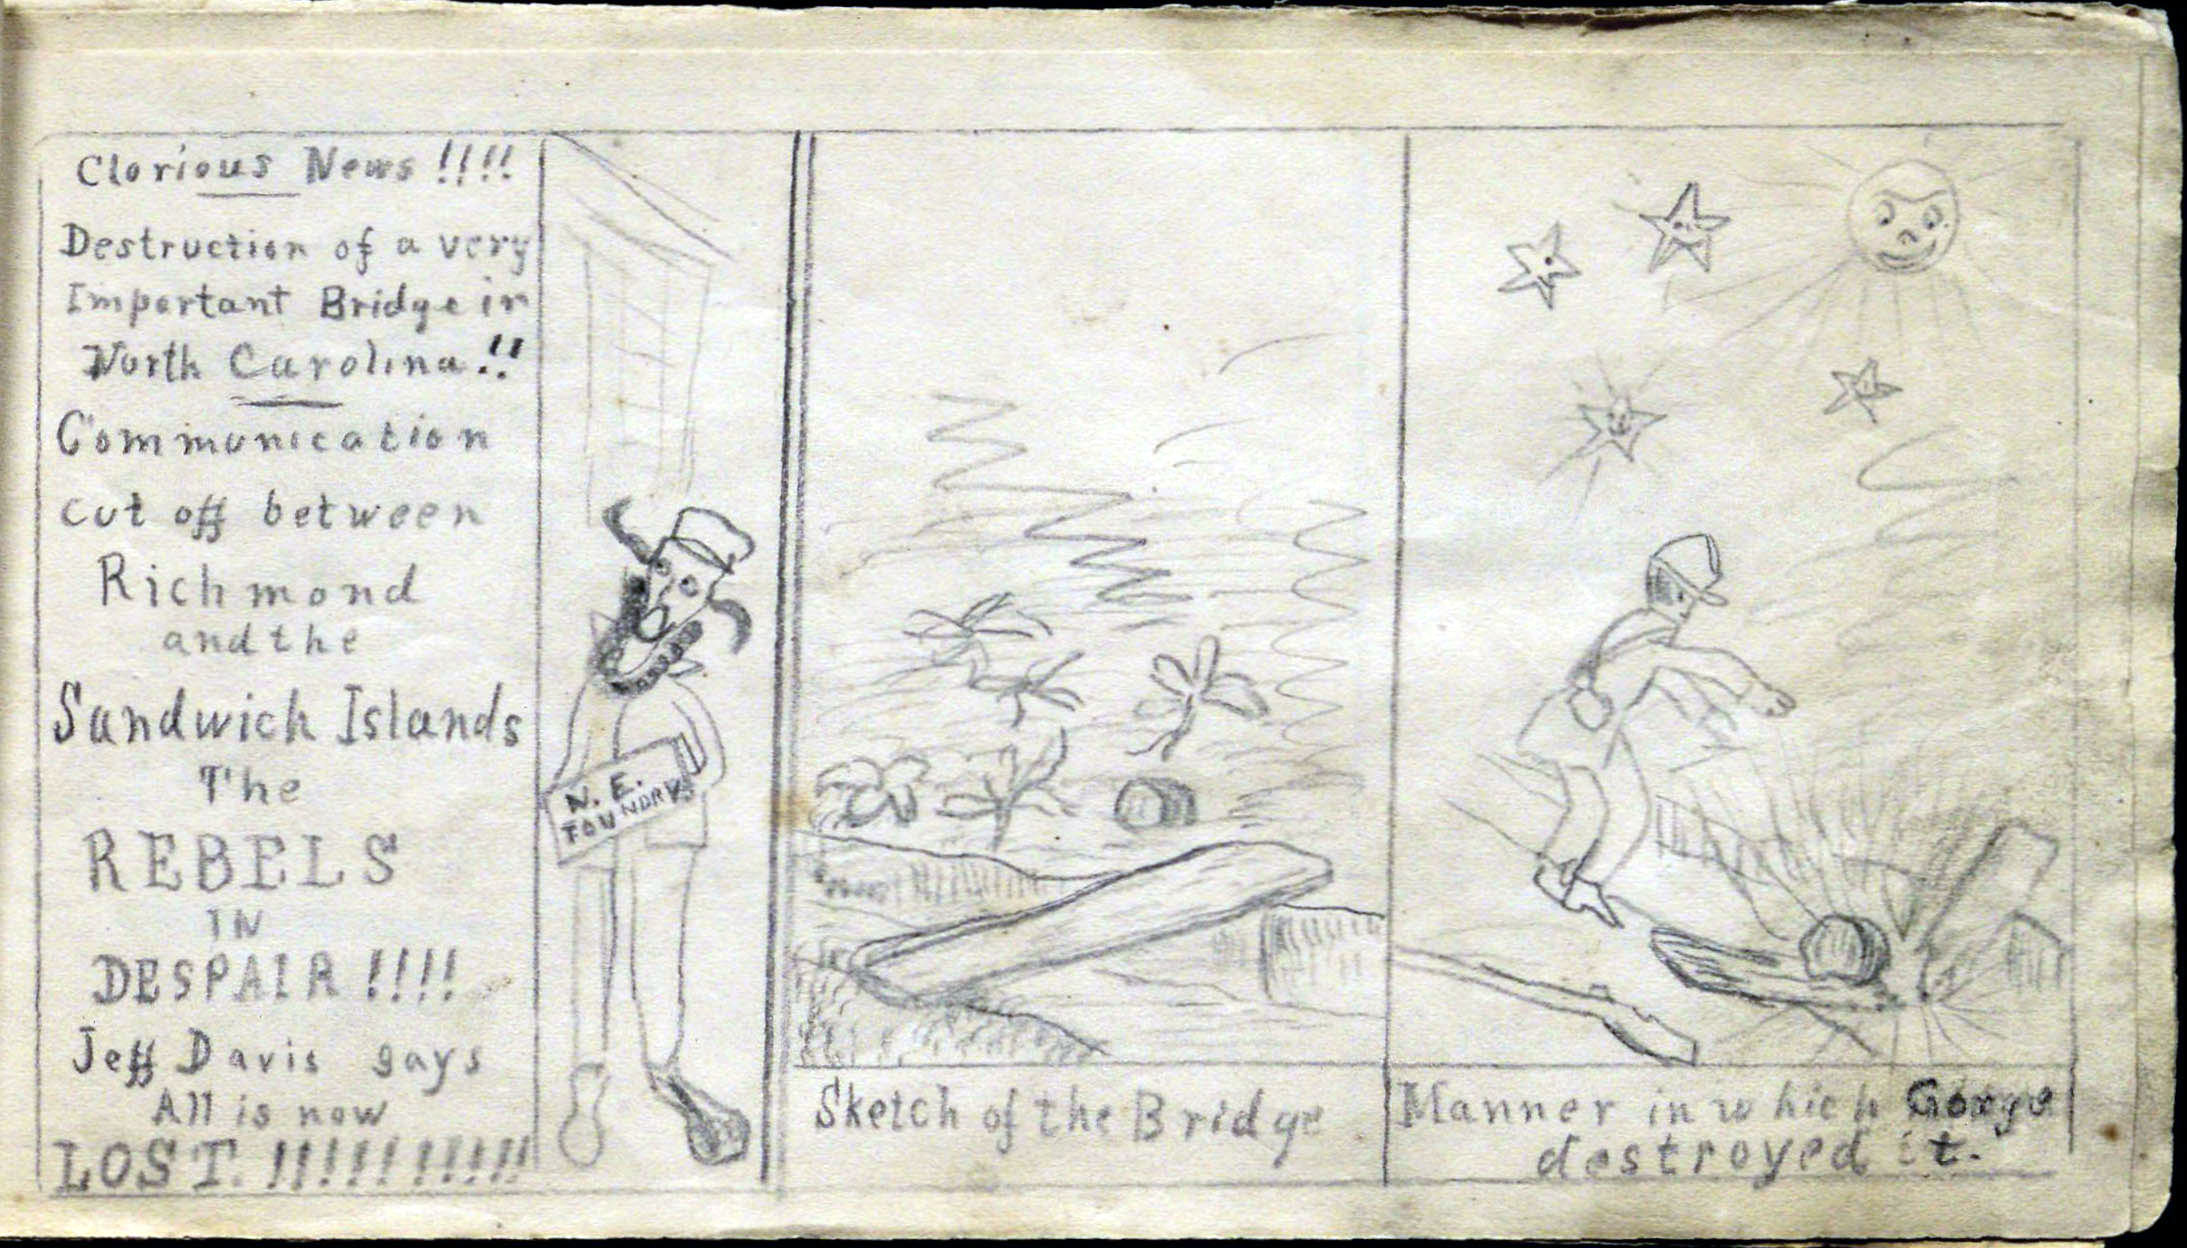 “Glorious News!!!!” in “A Few Scenes in the Life of A ‘SOJER’ in the Mass 44th,” 1863, graphite on paper, 10.5 x 20.5 cm (<a href="https://www.gilderlehrman.org/news/civil-war-soldier%E2%80%99s-sketchbook" target="_blank" rel="noopener">Gilder Lehrman Institute of American History</a>)